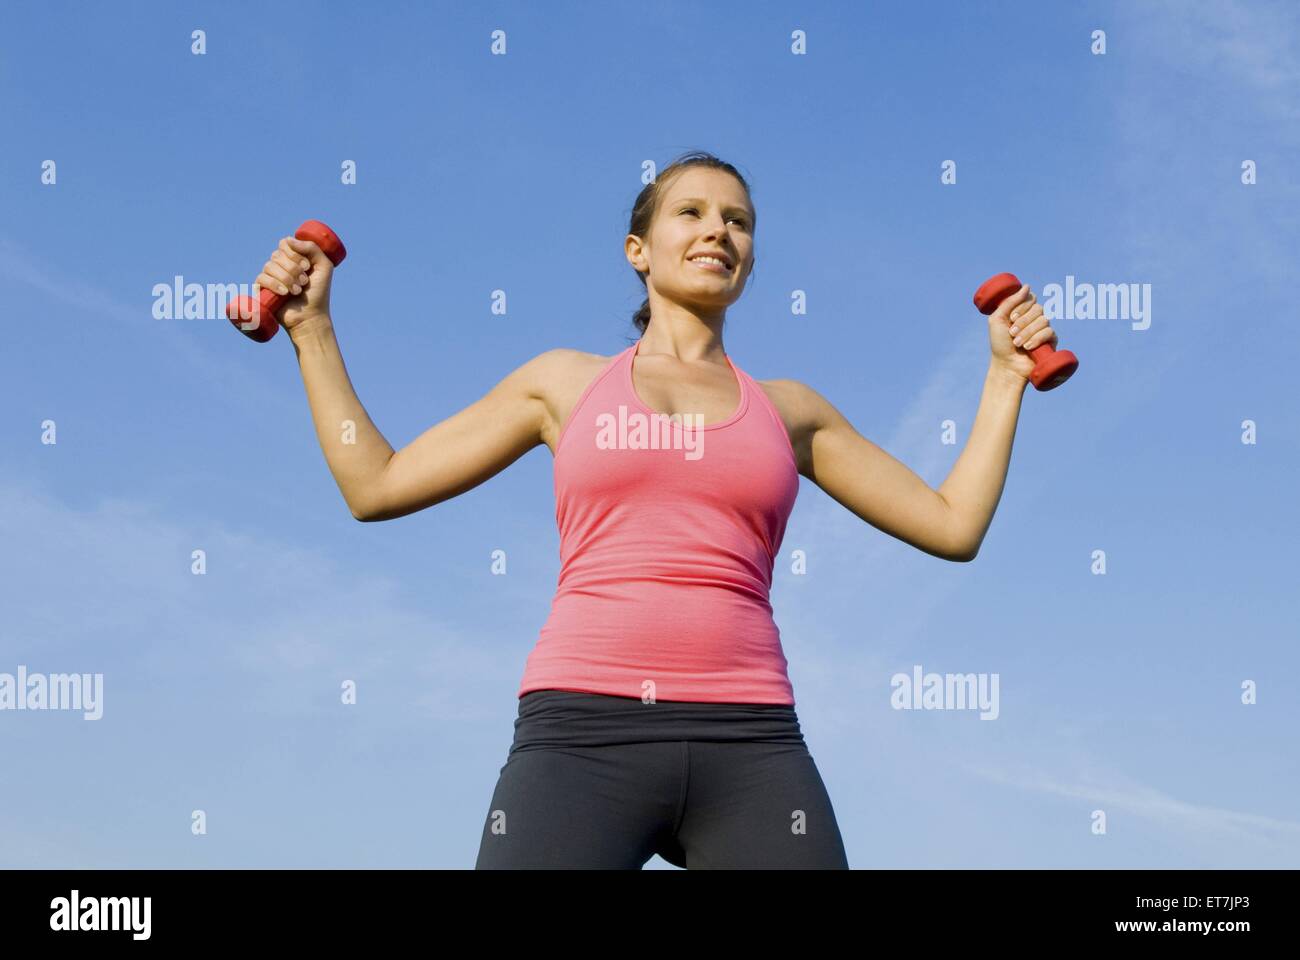 Junge Frau trainiert mit Hanteln in der Natur | butterfly, young woman lifting barbells outdoor, butterfly Stock Photo